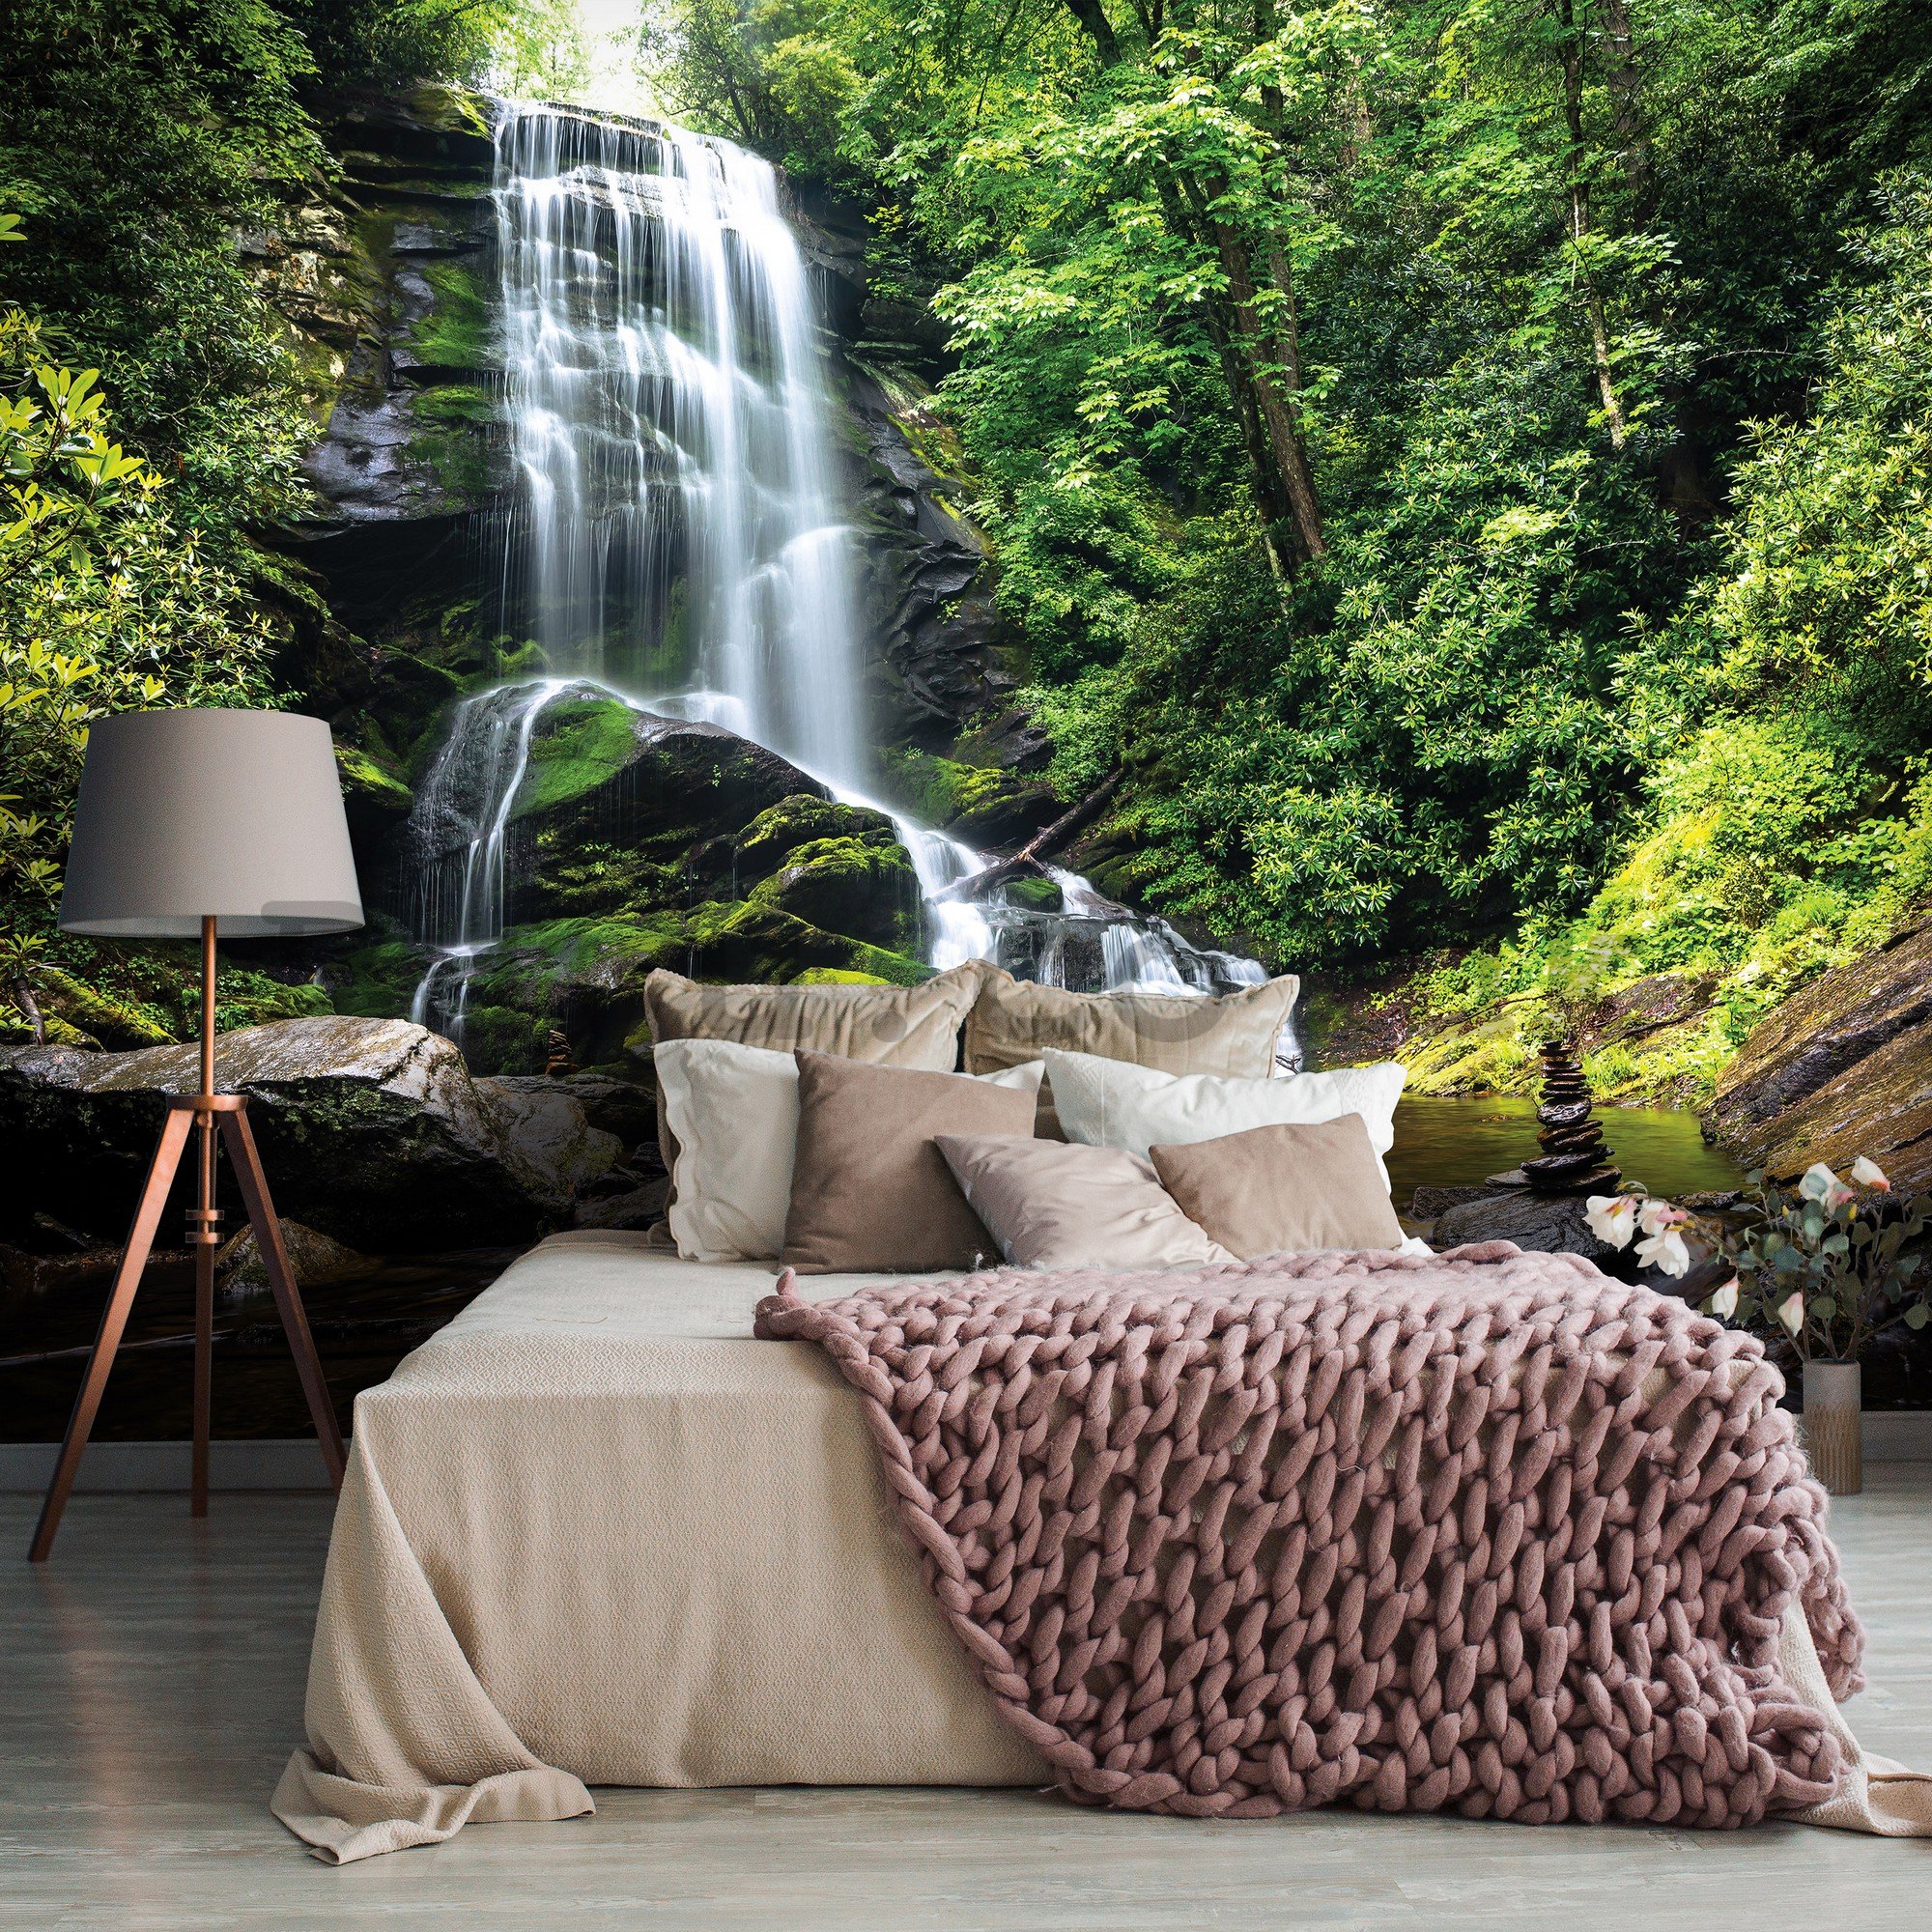 Wall mural vlies: White waterfall in the forest - 368x254 cm